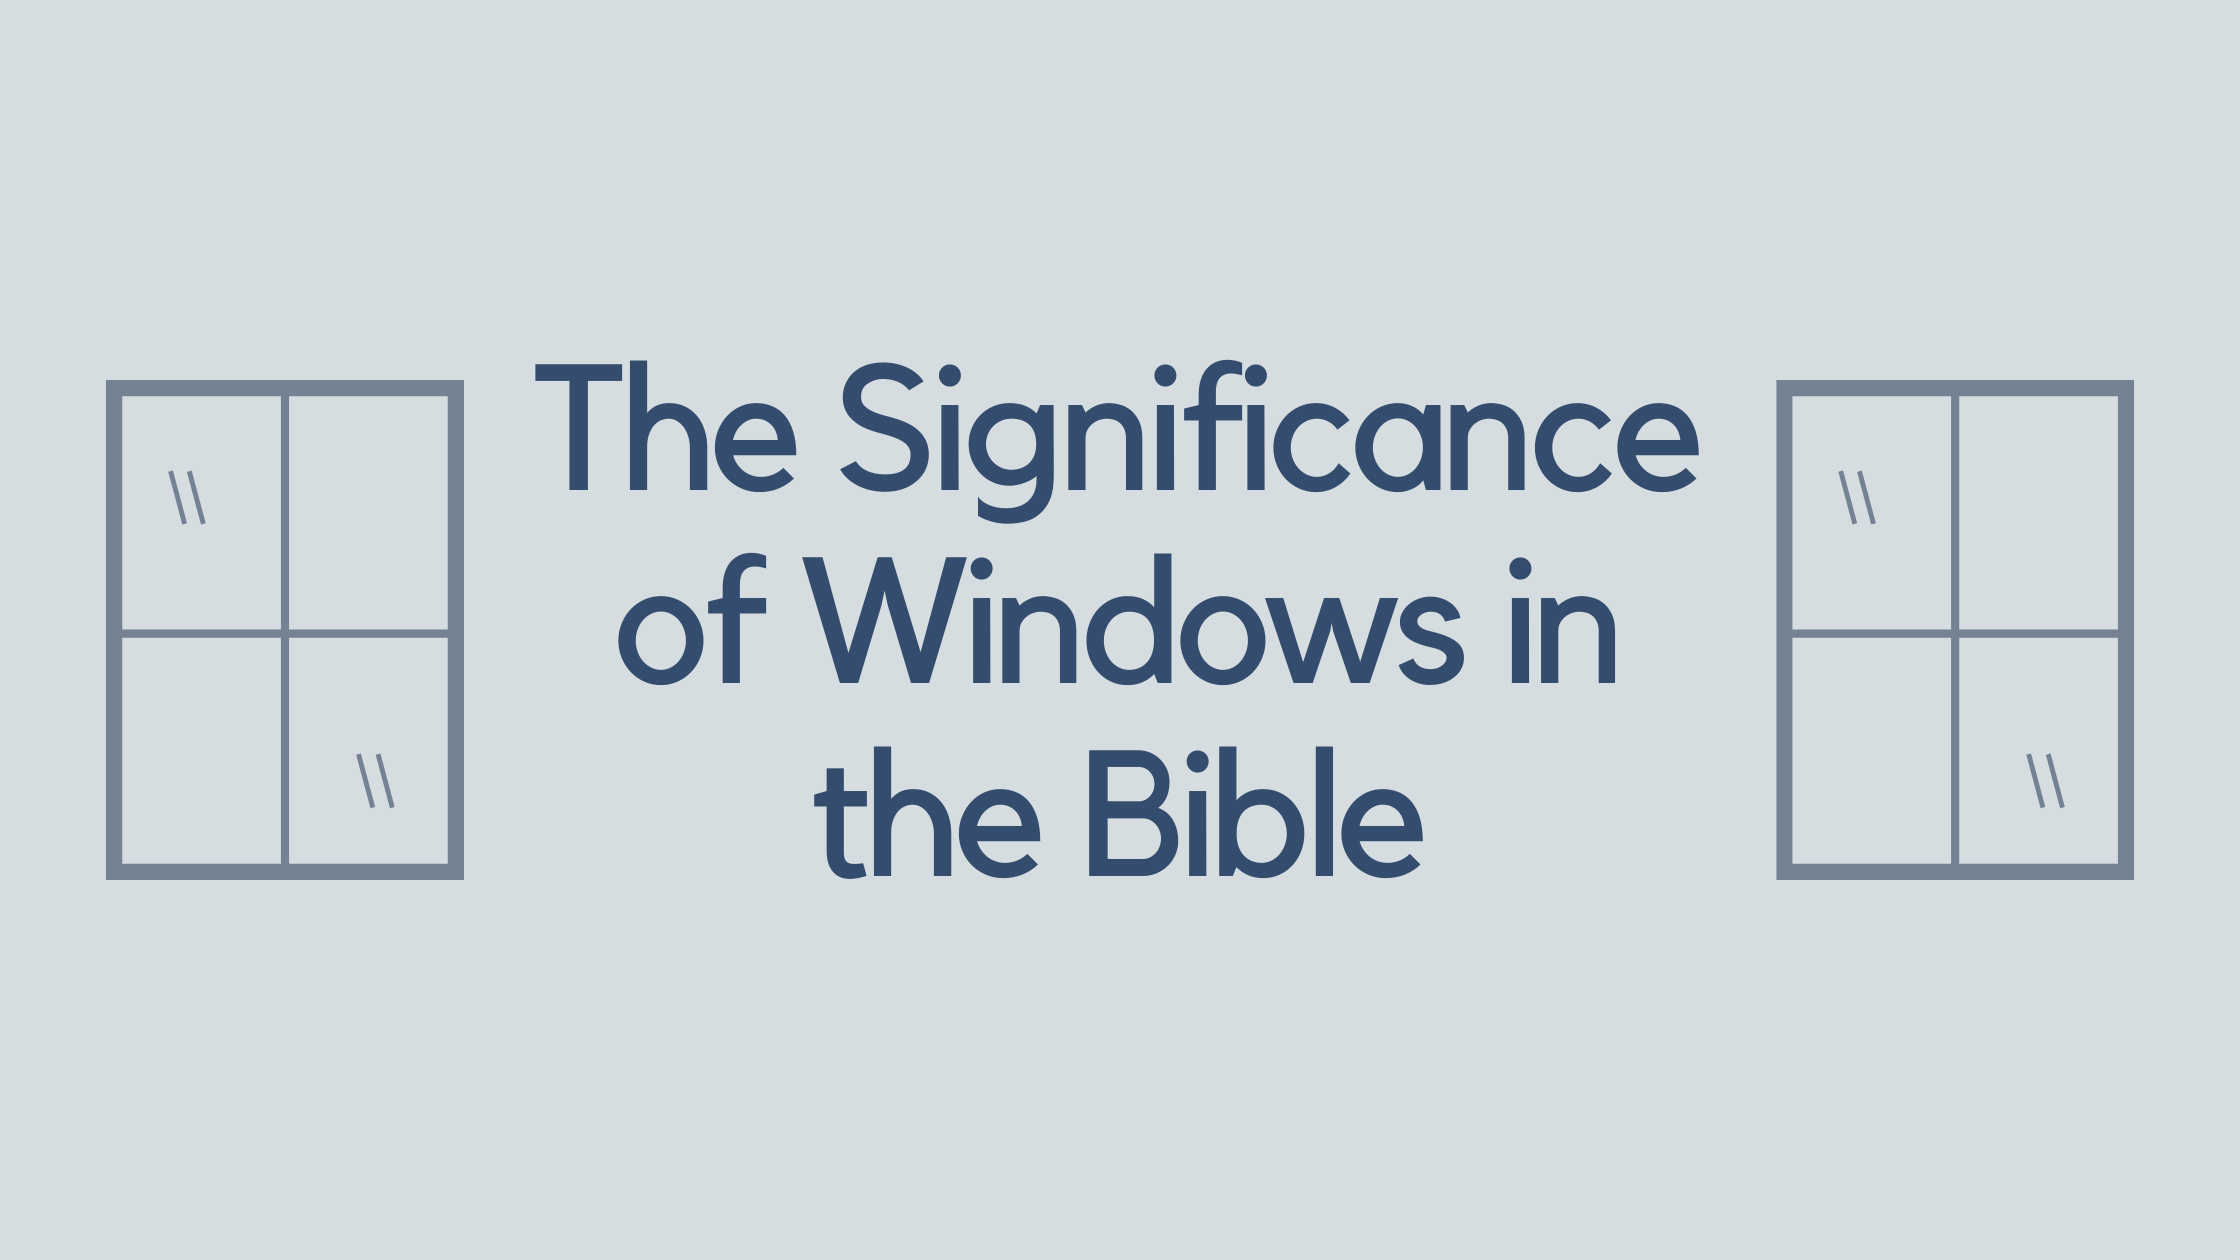 The Significance of Windows in the Bible